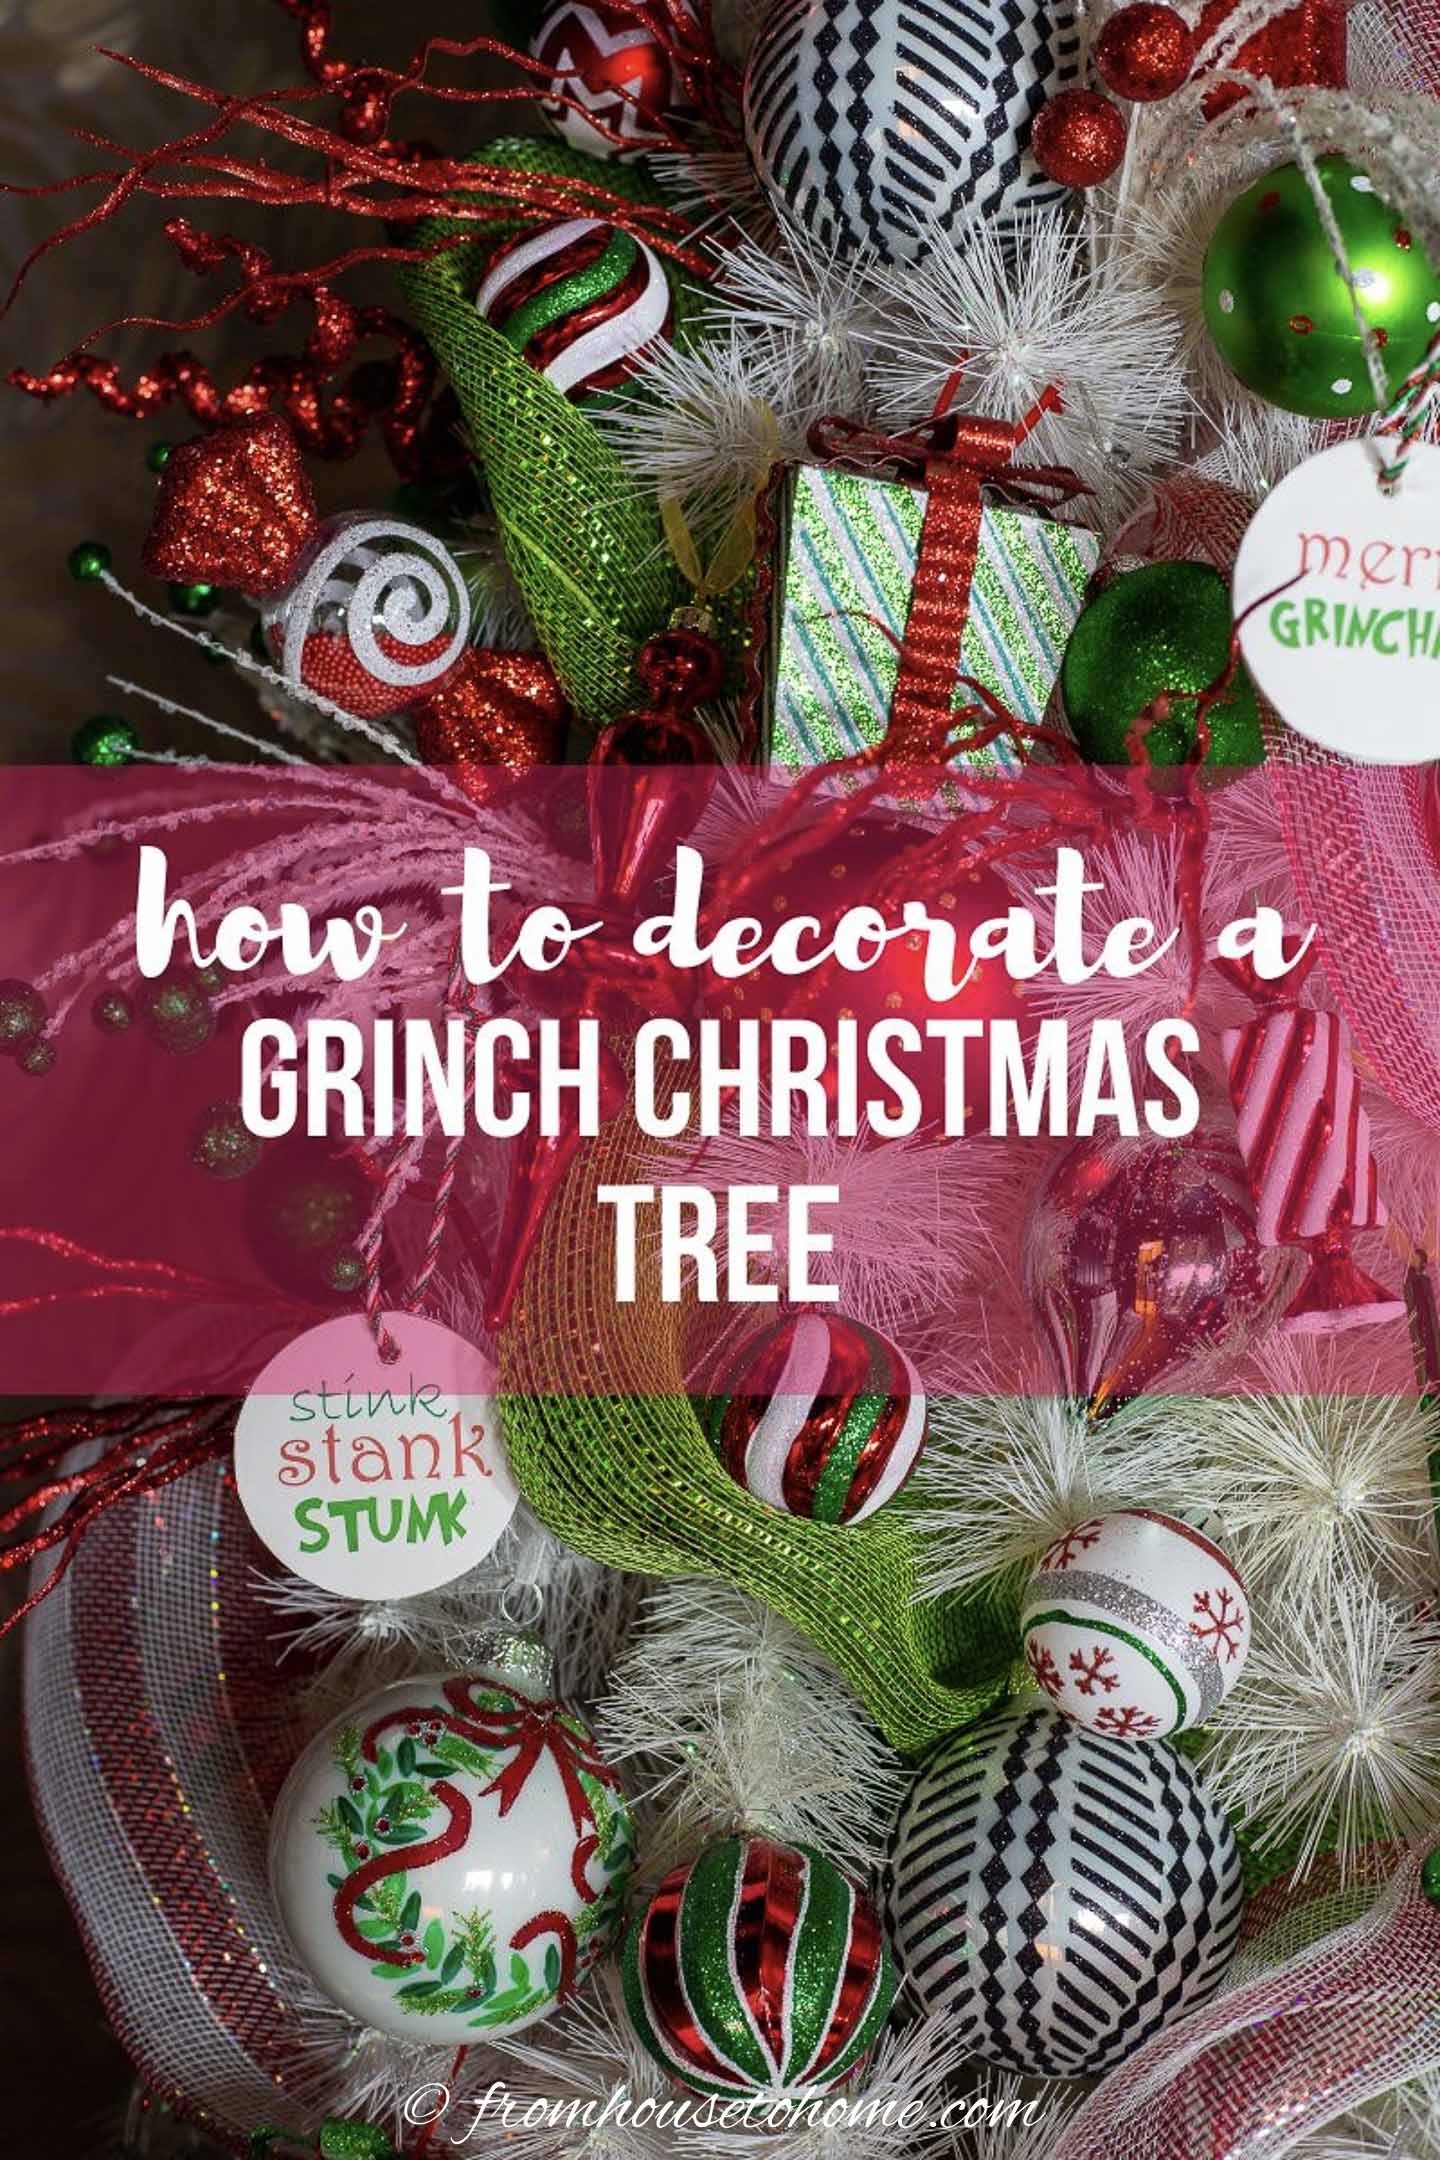 how to decorate a Grinch Christmas tree